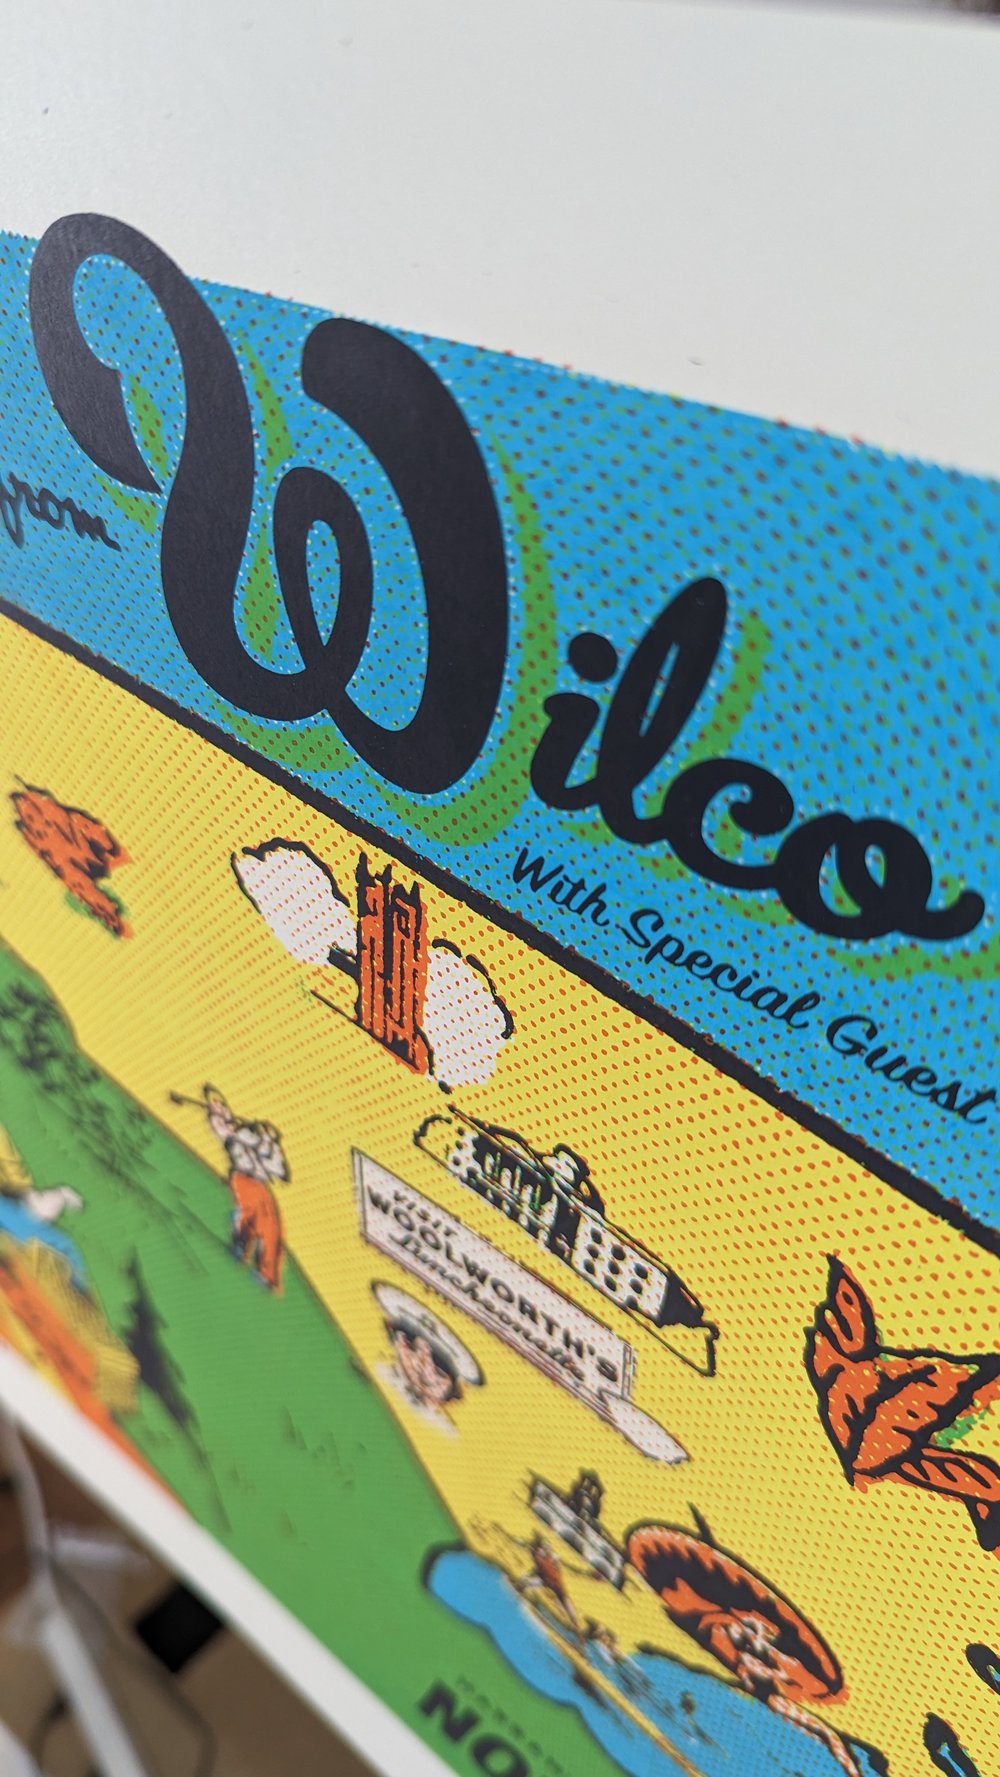 Wilco "Postcard from Asheville" poster, Asheville, NC, April 28, 2023 